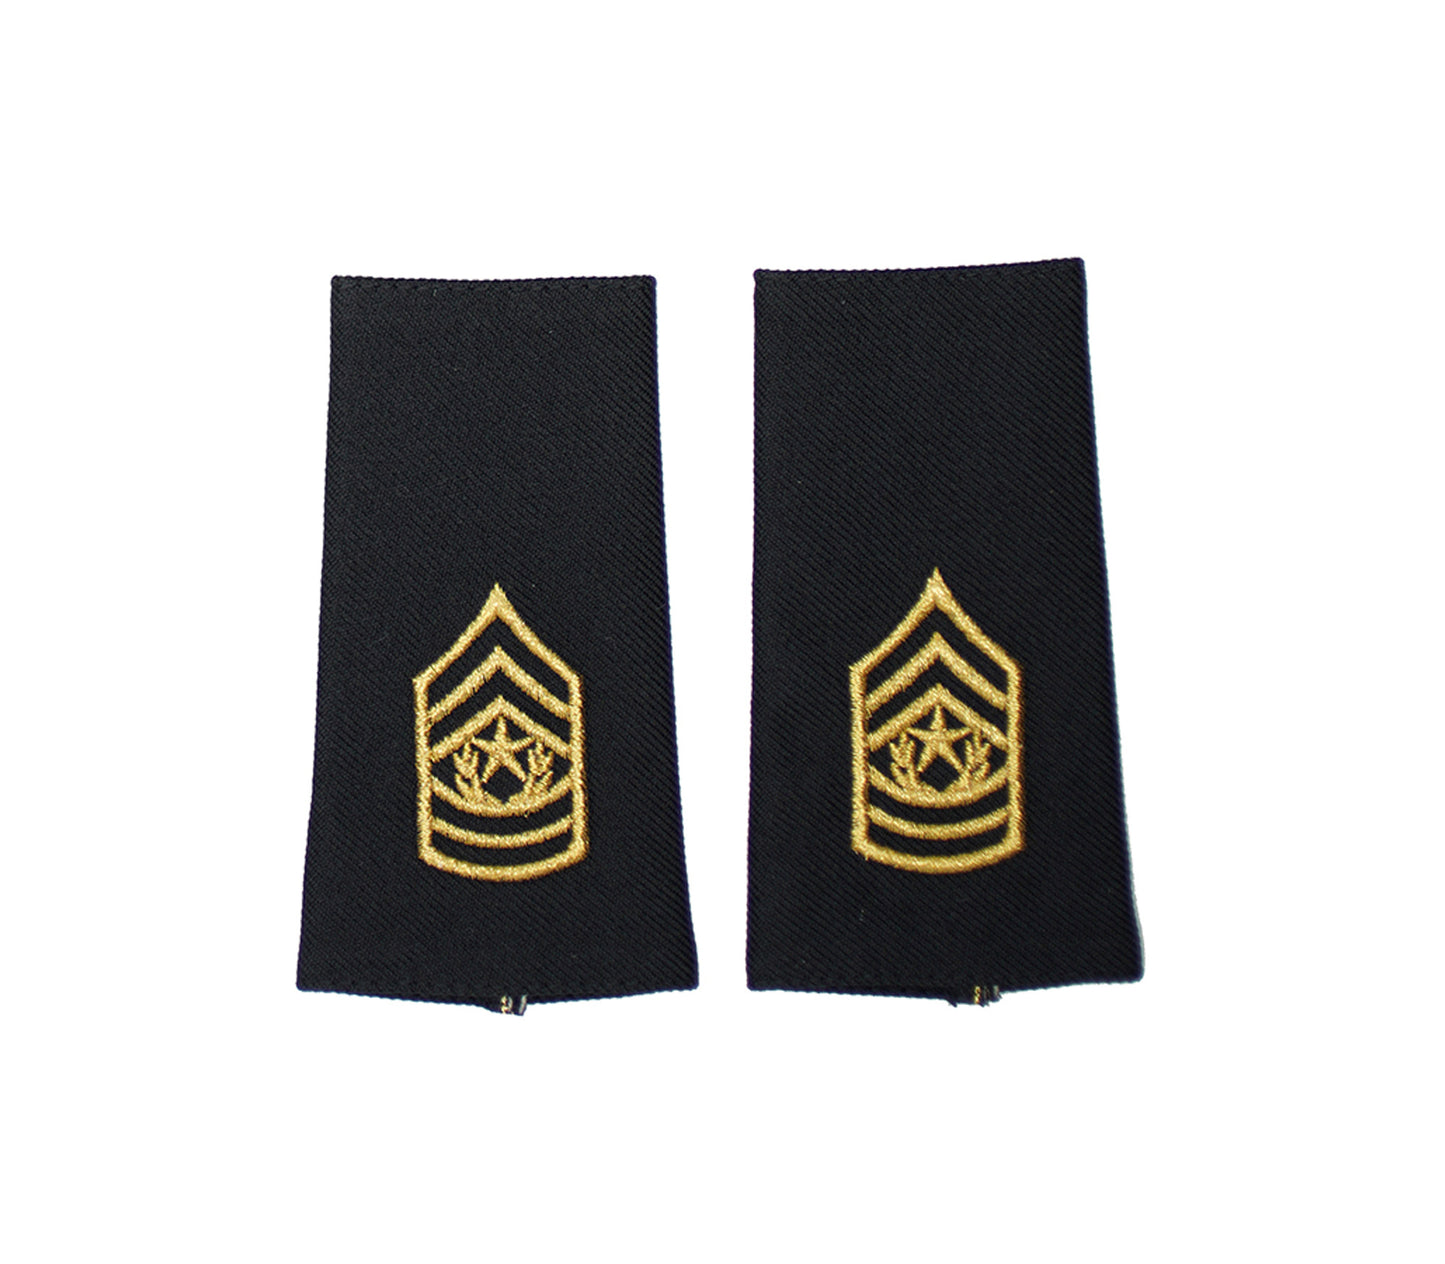 US Army E9 Command Sergeant Major Shoulder Marks - Large/Male – Sta ...